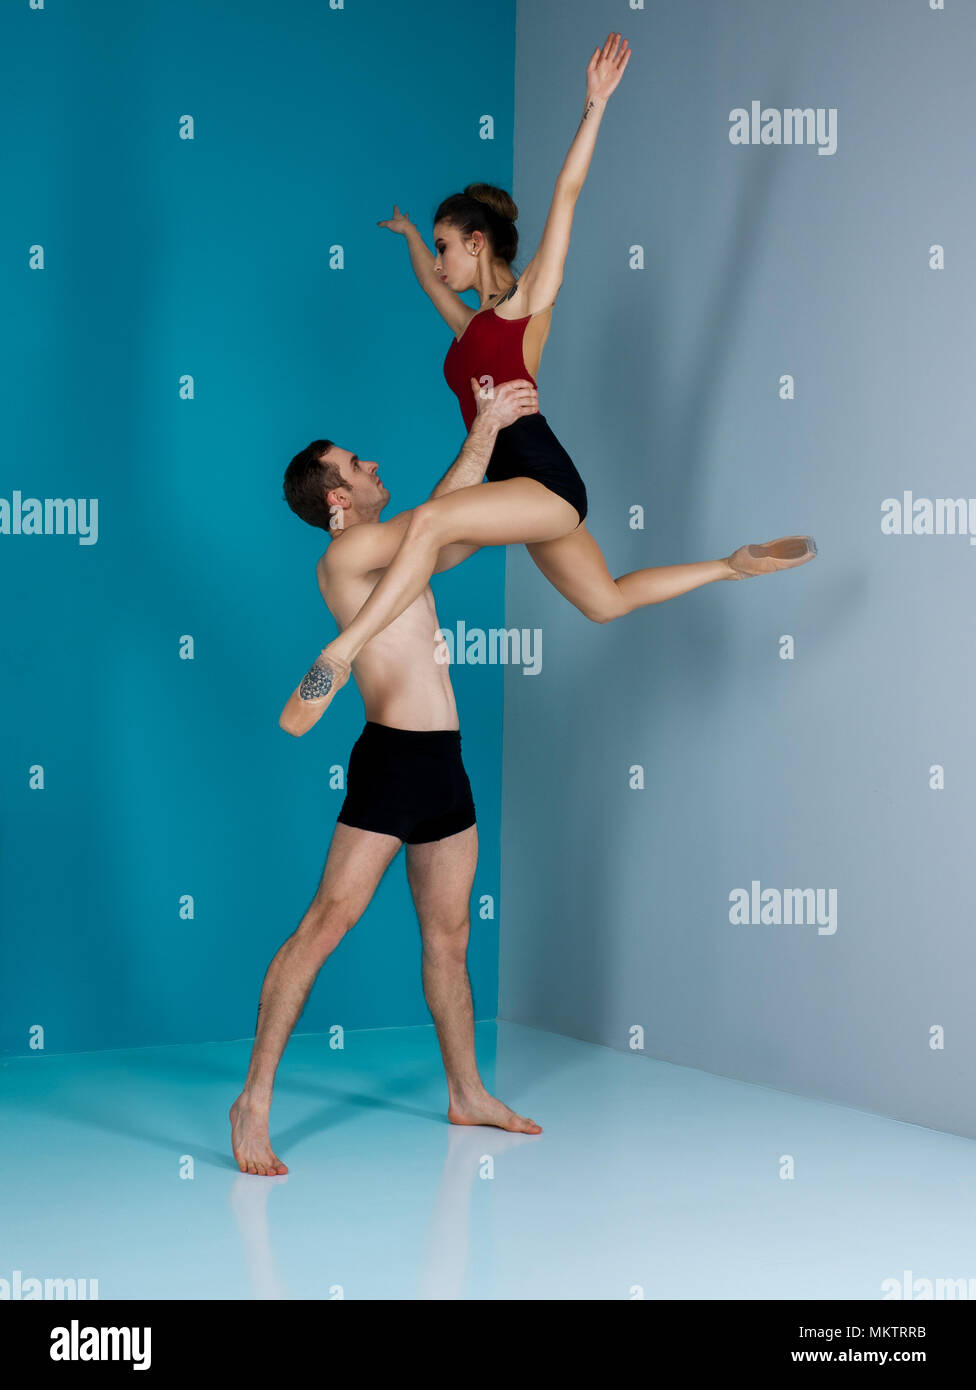 Modern ballet dancer couple in black form performing art jump with empty copy space background, izolated space Stock Photo